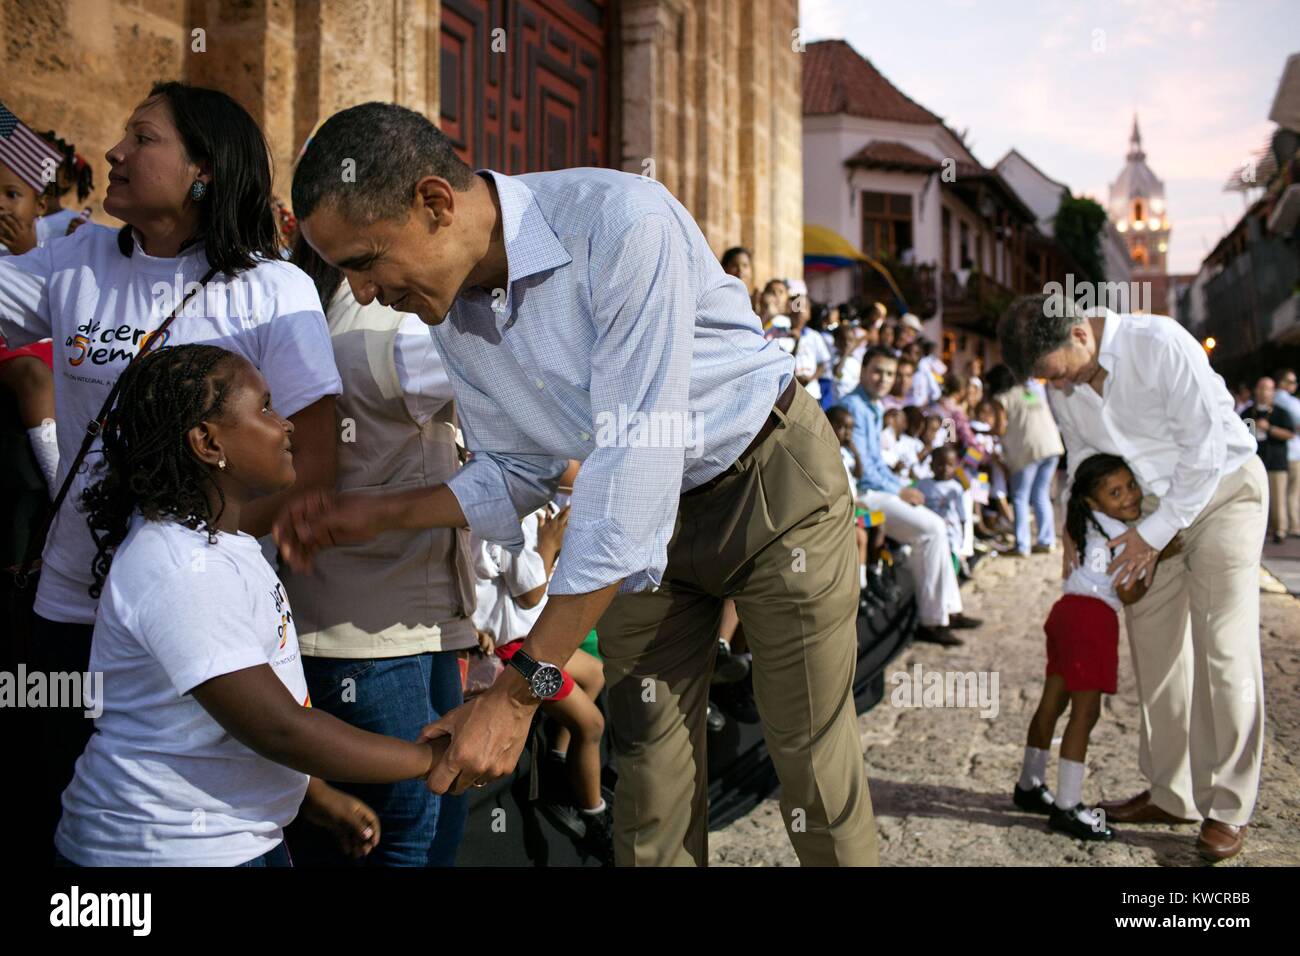 President Barack Obama after a Land Titling event at the Plaza de San Pedro, Cartagena, Colombia. Families were given titles to land they farmed for decades. President Juan Manuel Santos of Colombia is at right. April 15, 2012 (BSLOC 2015 3 160) Stock Photo